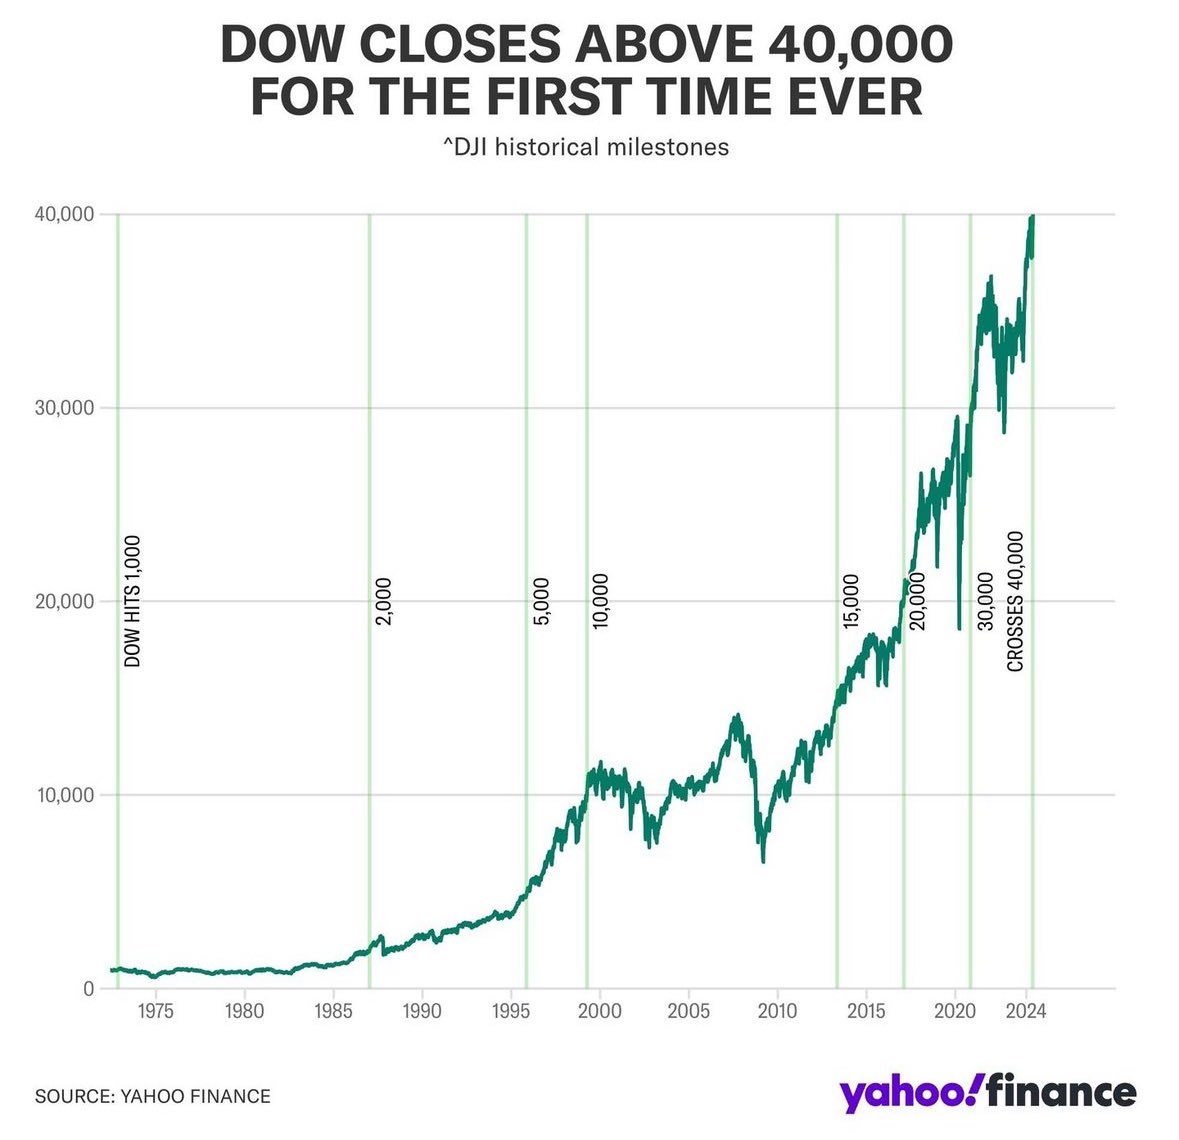 The Dow Jones closed yesterday above 40,000 for the first time ever Heres more historical milestones for the Dow 👀⬇️